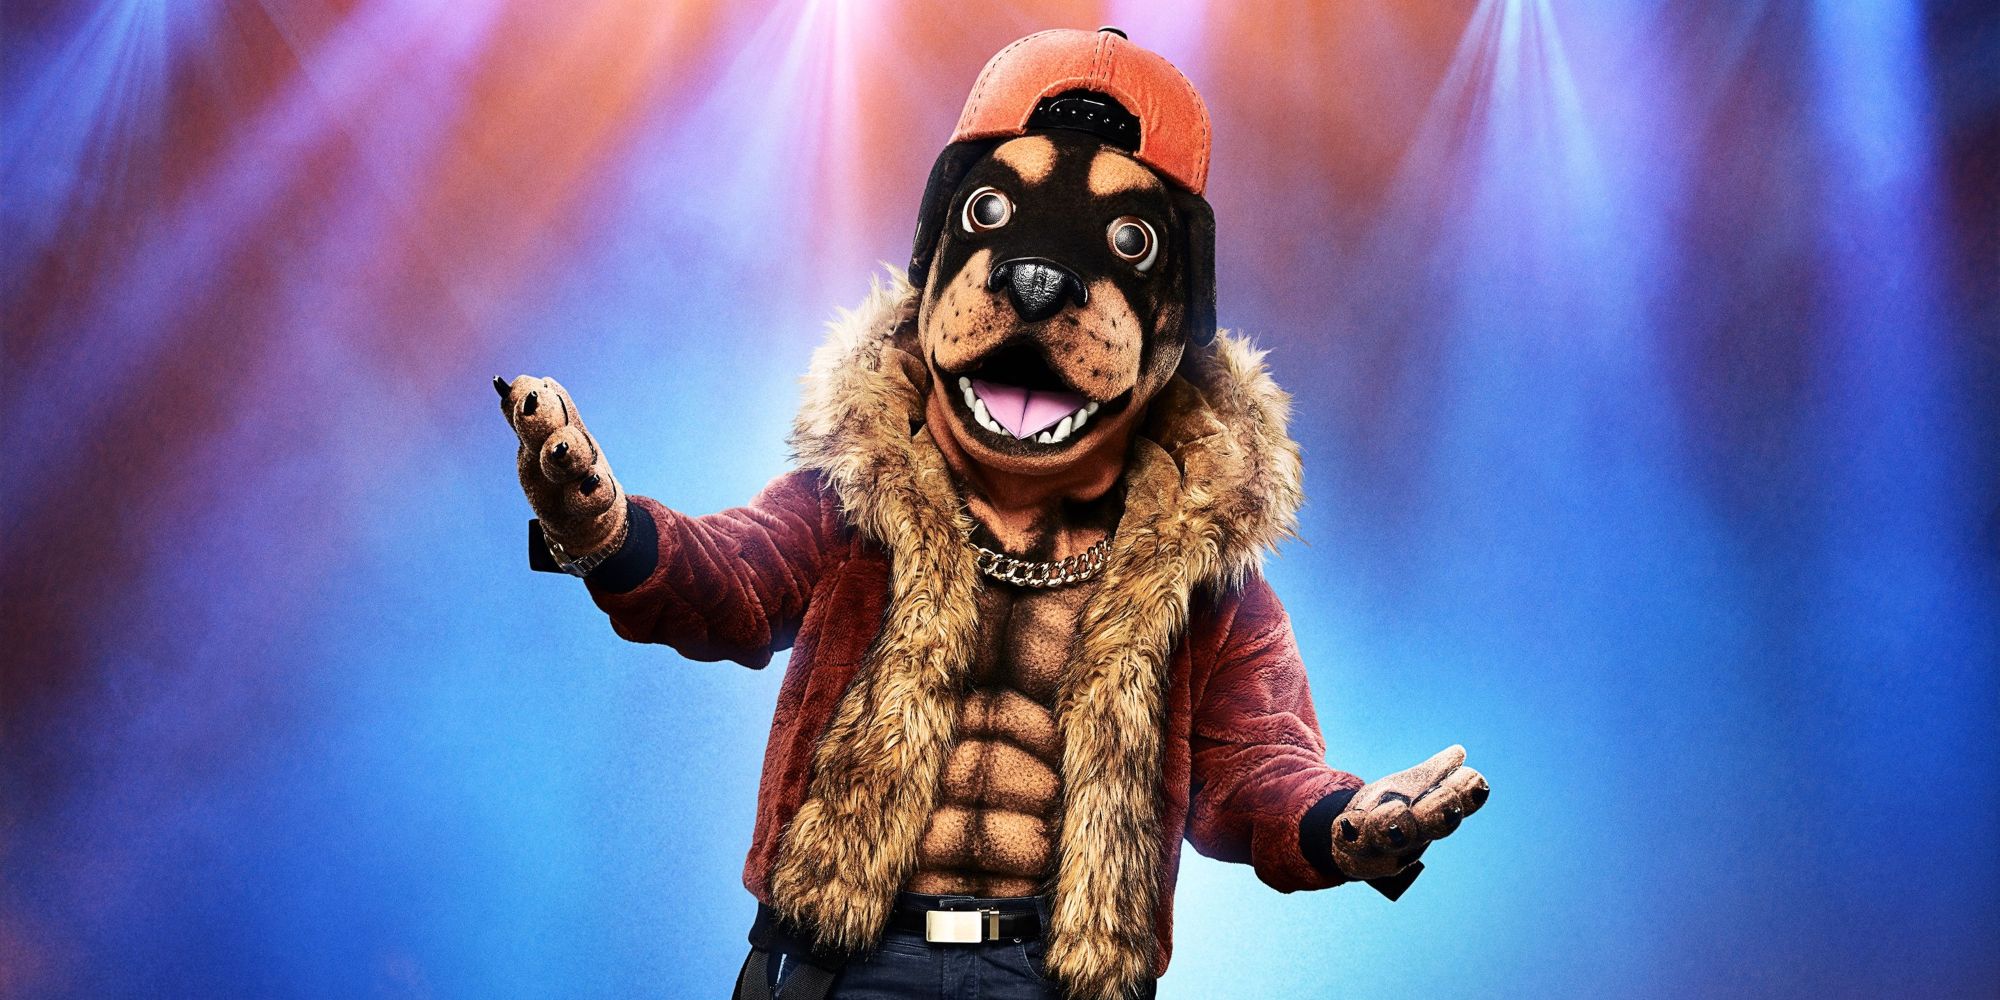 The Rottweiler promo image from The Masked Singer